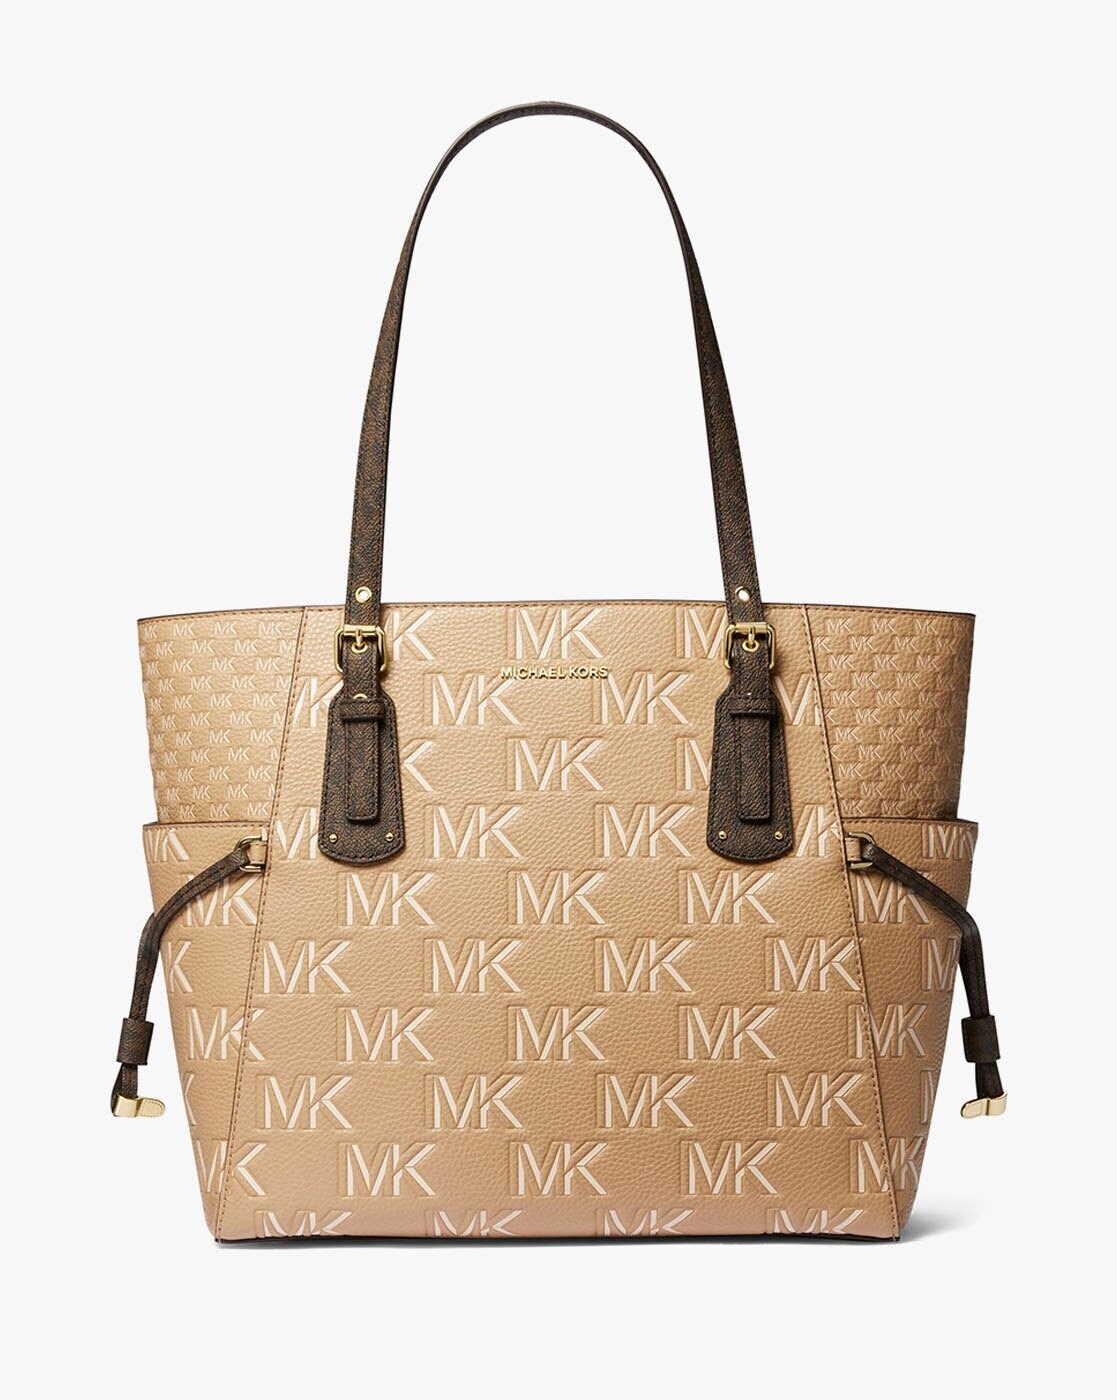 Michael Kors Ludlow Large Shoulder Bag in Walnut Brown Leather : Amazon.in:  Shoes & Handbags